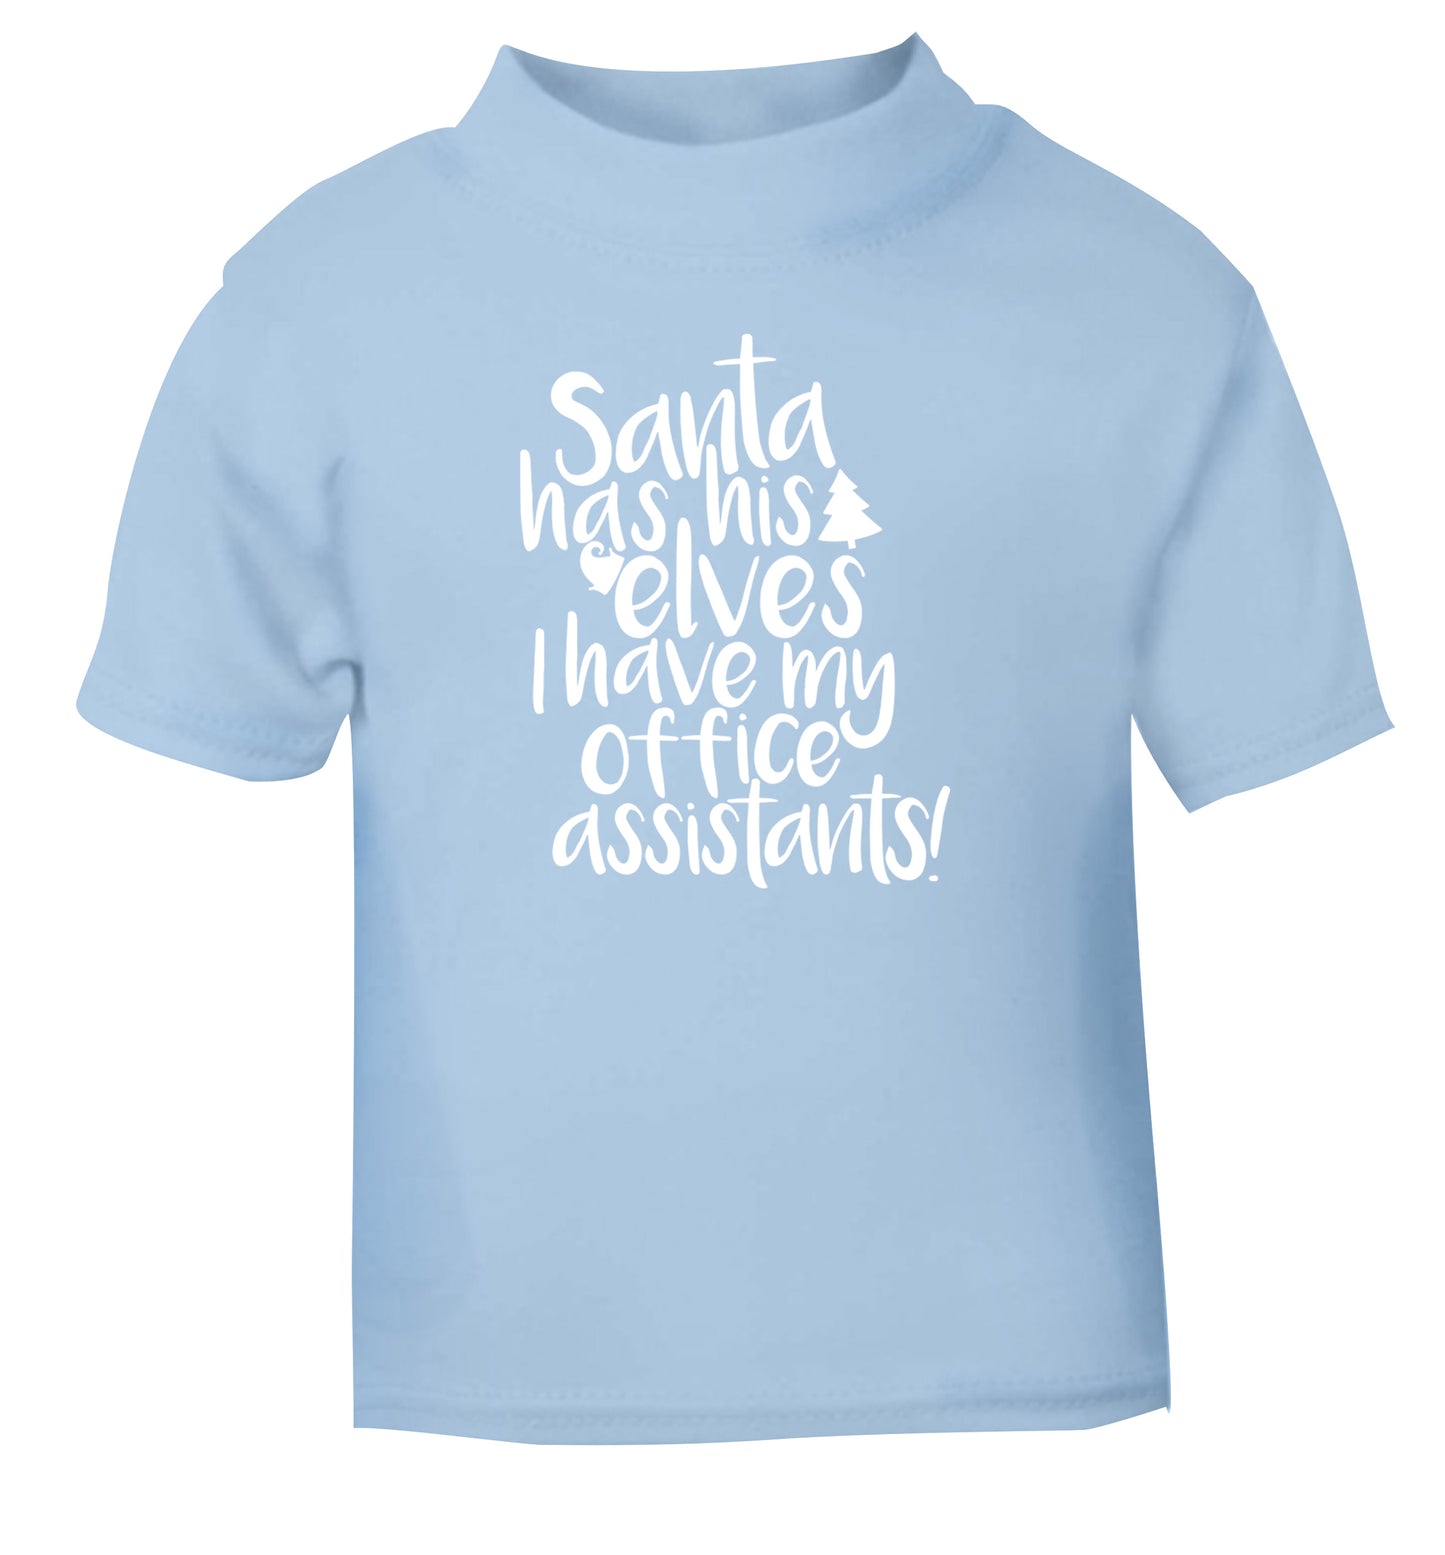 Santa has elves I have office assistants light blue Baby Toddler Tshirt 2 Years